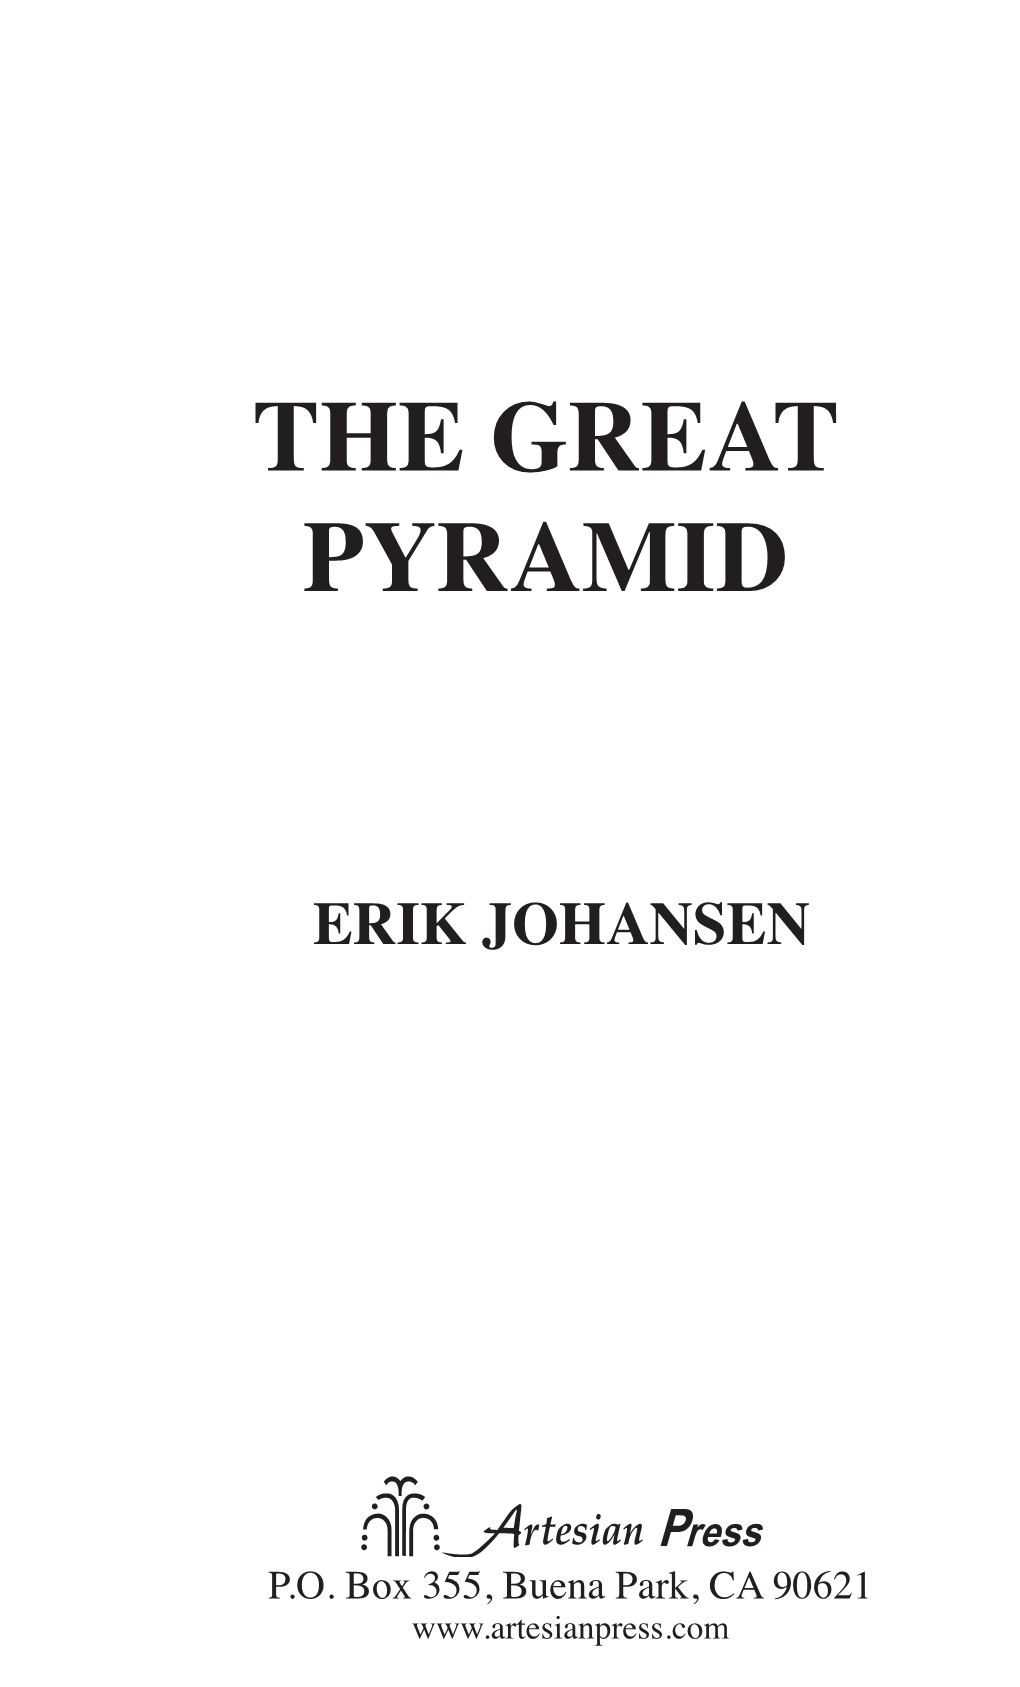 THE GREAT PYRAMID TEXT.Indd